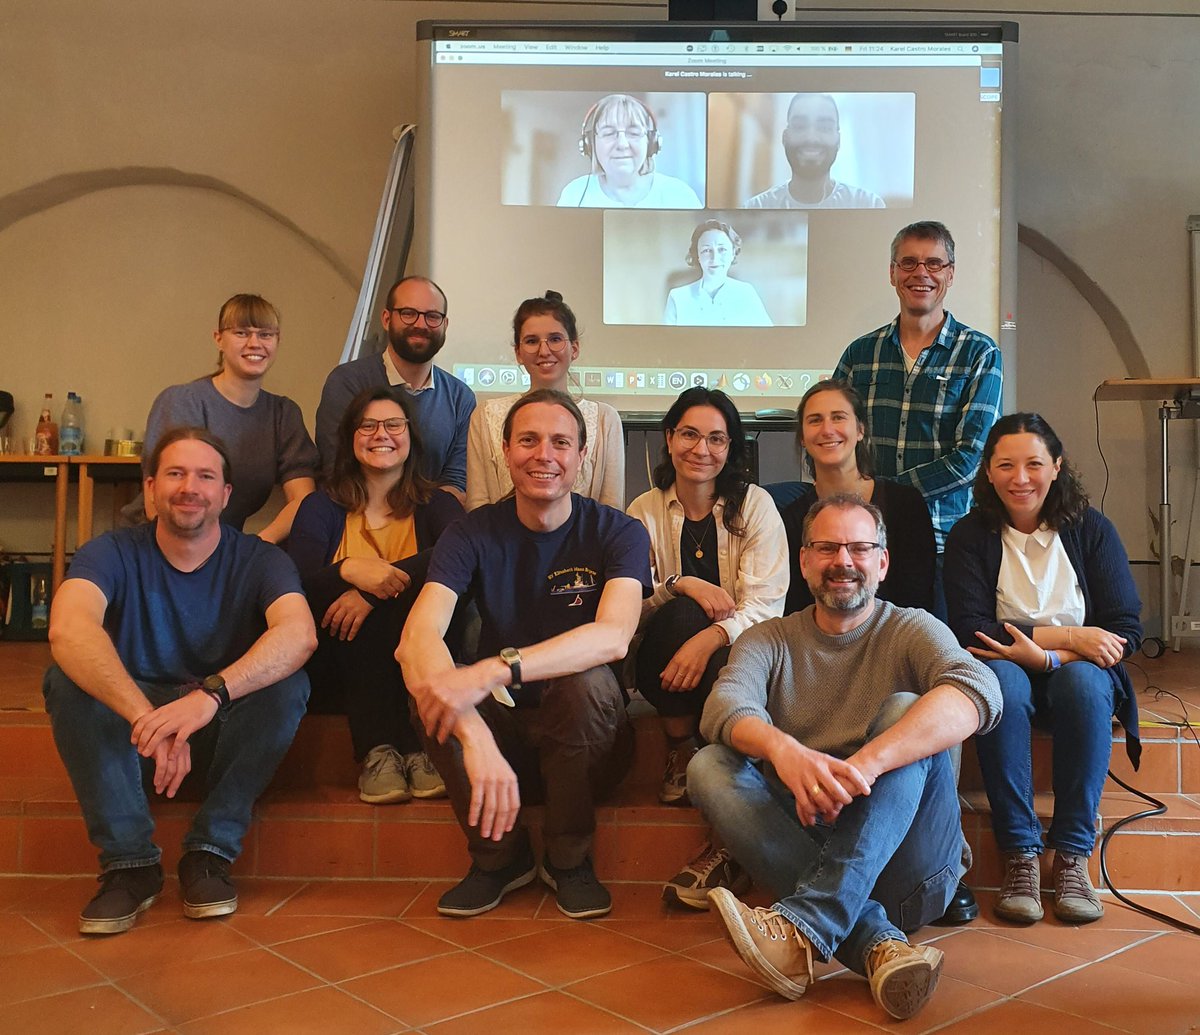 Our @CSCOPE7 team met @UniJena for our mid-term meeting. We exchanged on progress & next steps of the project. It’s so inspiring to work in such an interdisciplinary team!Thanks @KCastroMorales for organizing! @IDOS_research @GEOMAR_de @Ostseeforschung @ArgoGermany @UERJ_oficial